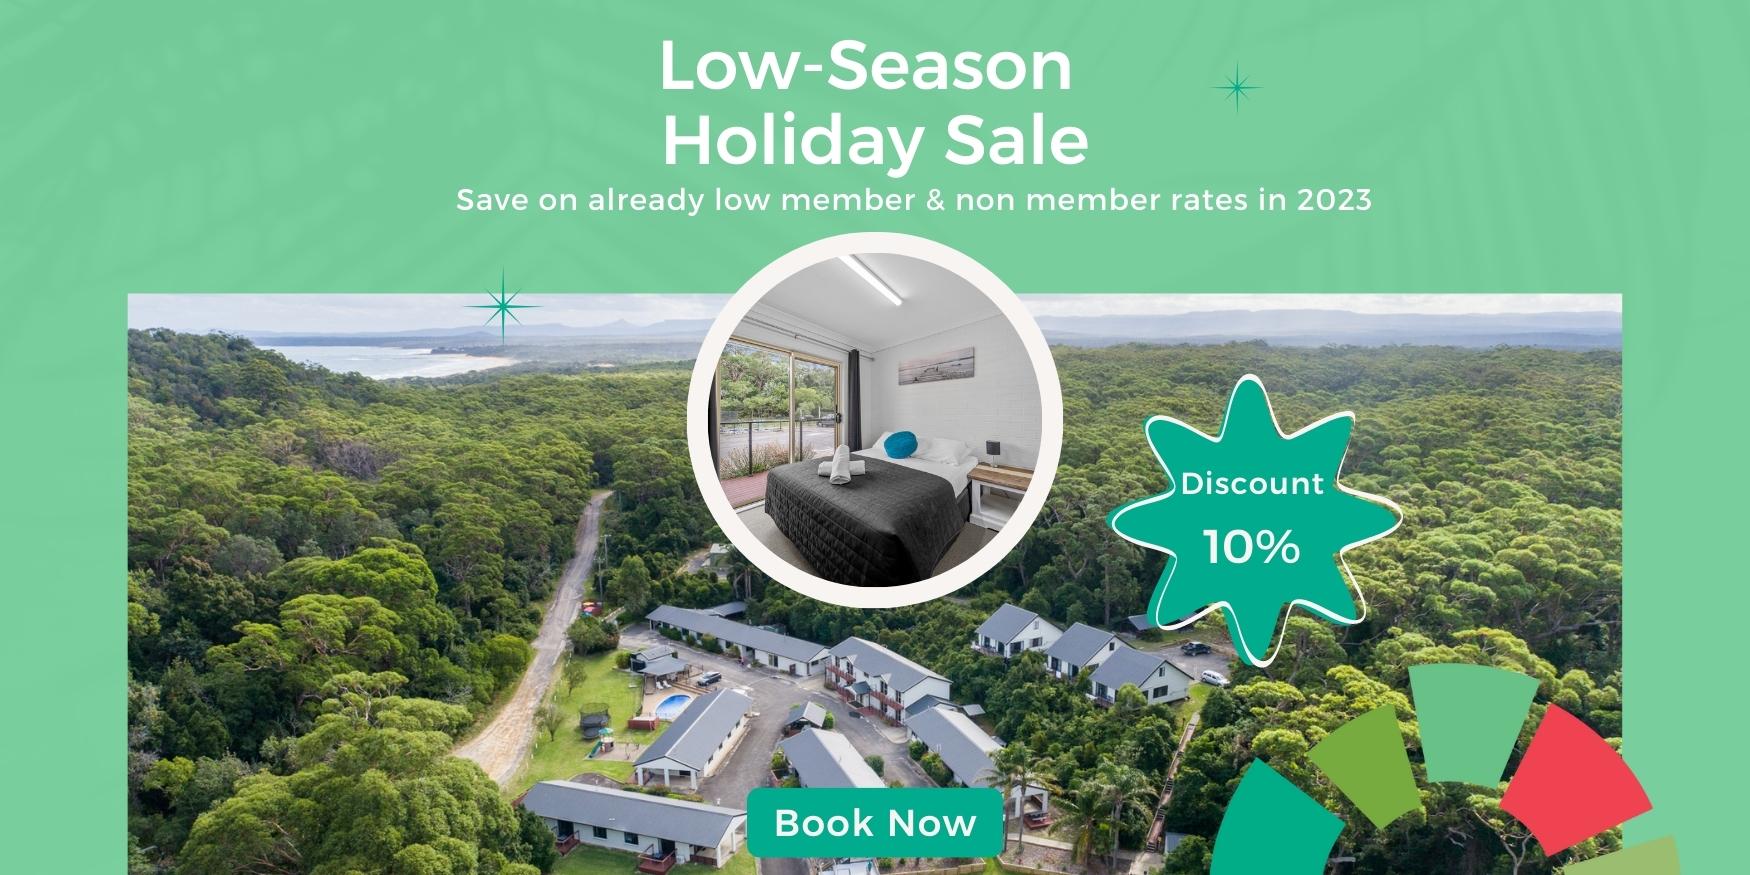  Enjoy discounted low-season holidays at Haven Holiday Resort in Sussex Inlet on the NSW South Coast